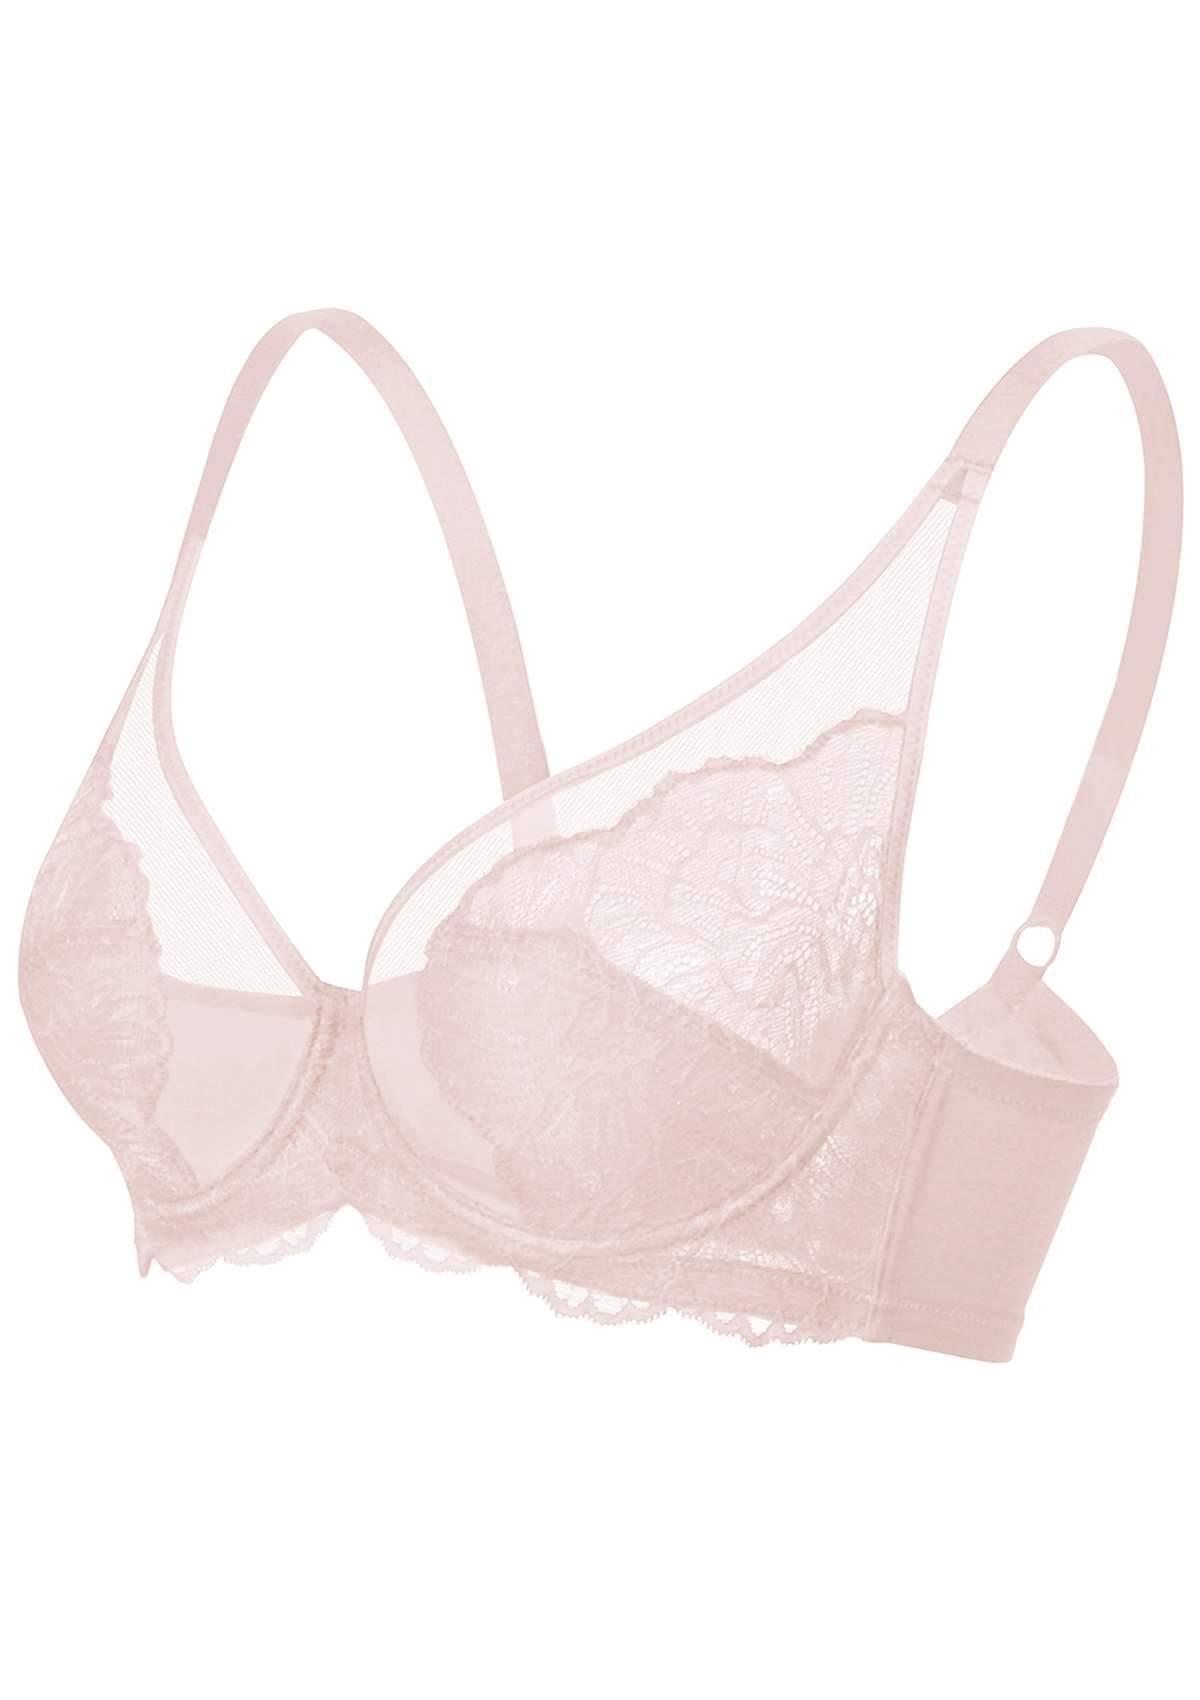 HSIA Blossom Lace Bra And Panties Set: Best Bra For Large Busts - Dark Pink / 38 / DDD/F